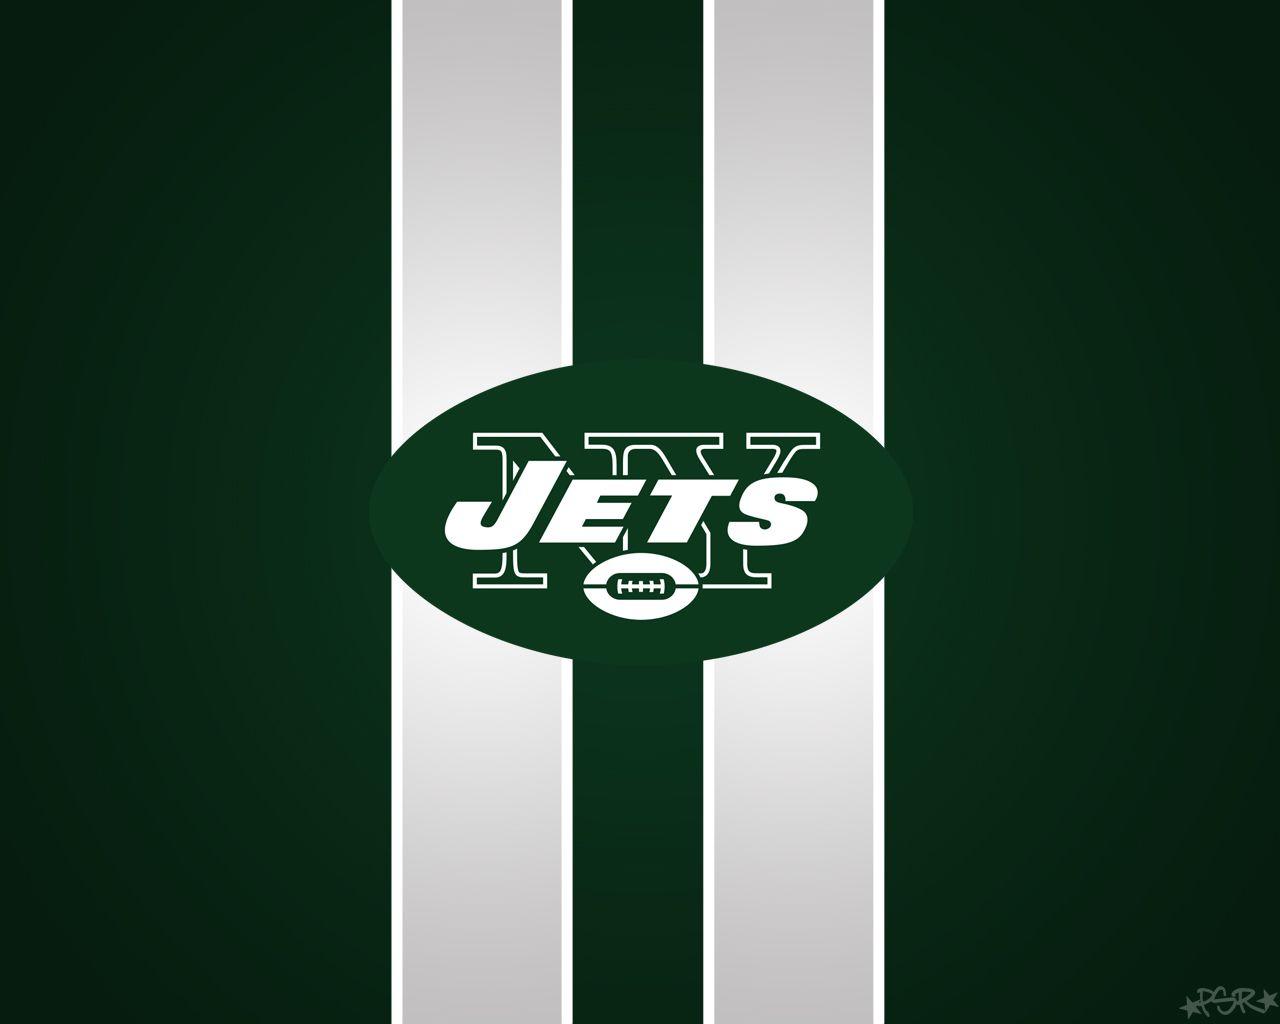 70 New York Jets HD Wallpapers